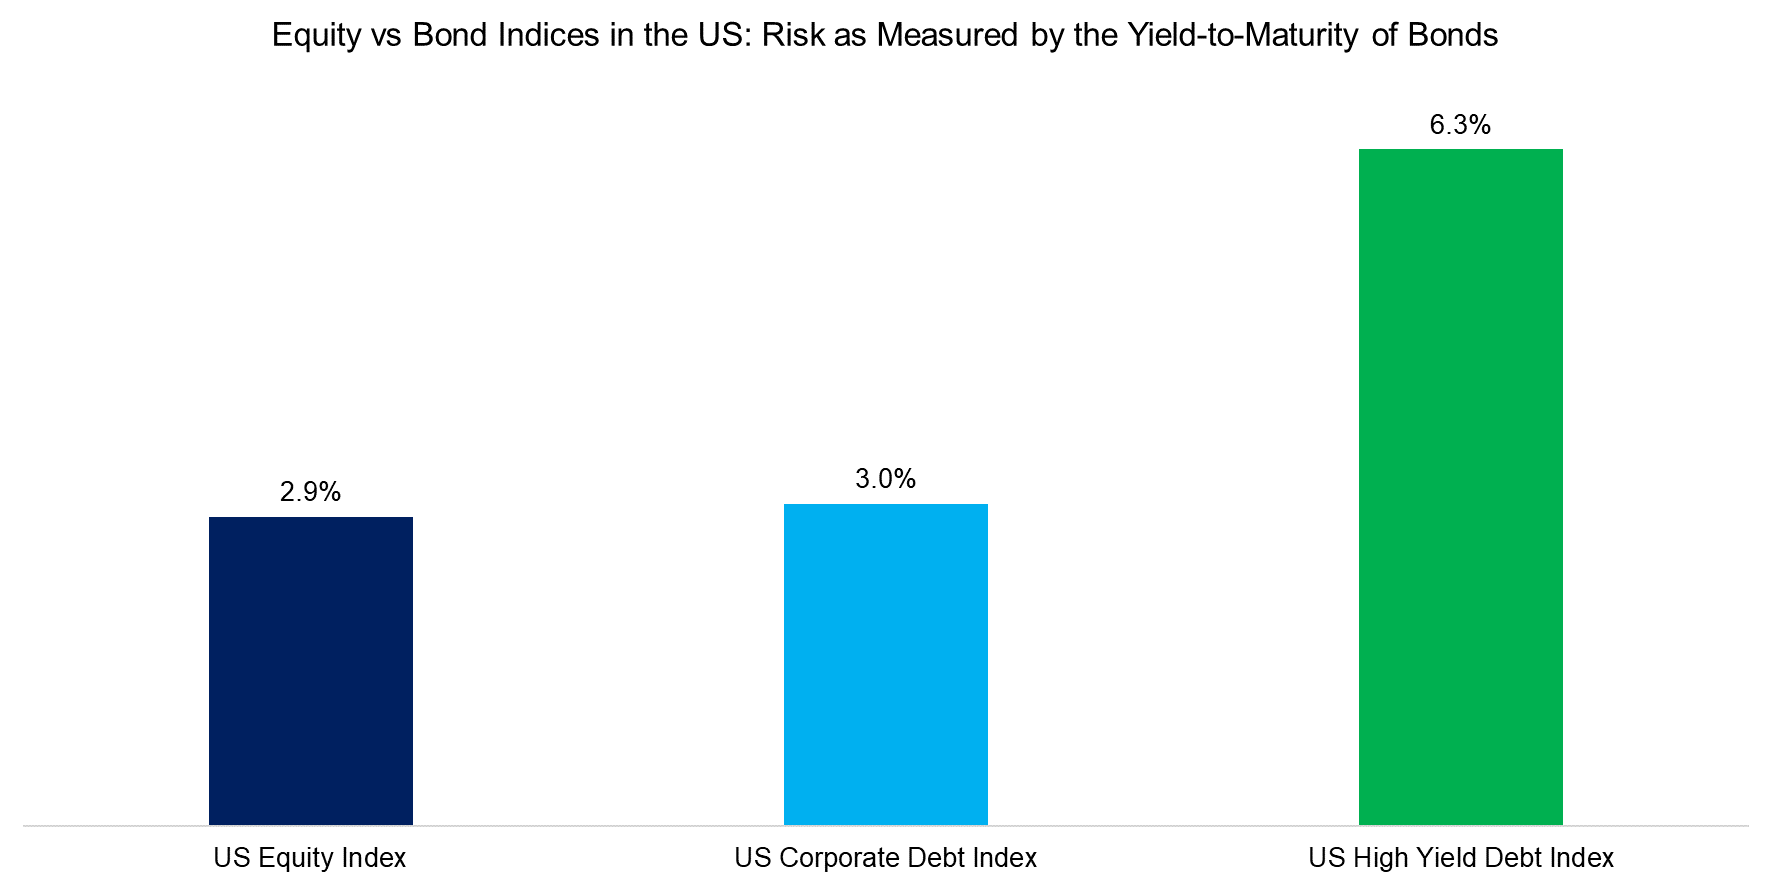 Equity vs Bond Indices in the US Risk as Measured by the Yield-to-Maturity of Bonds